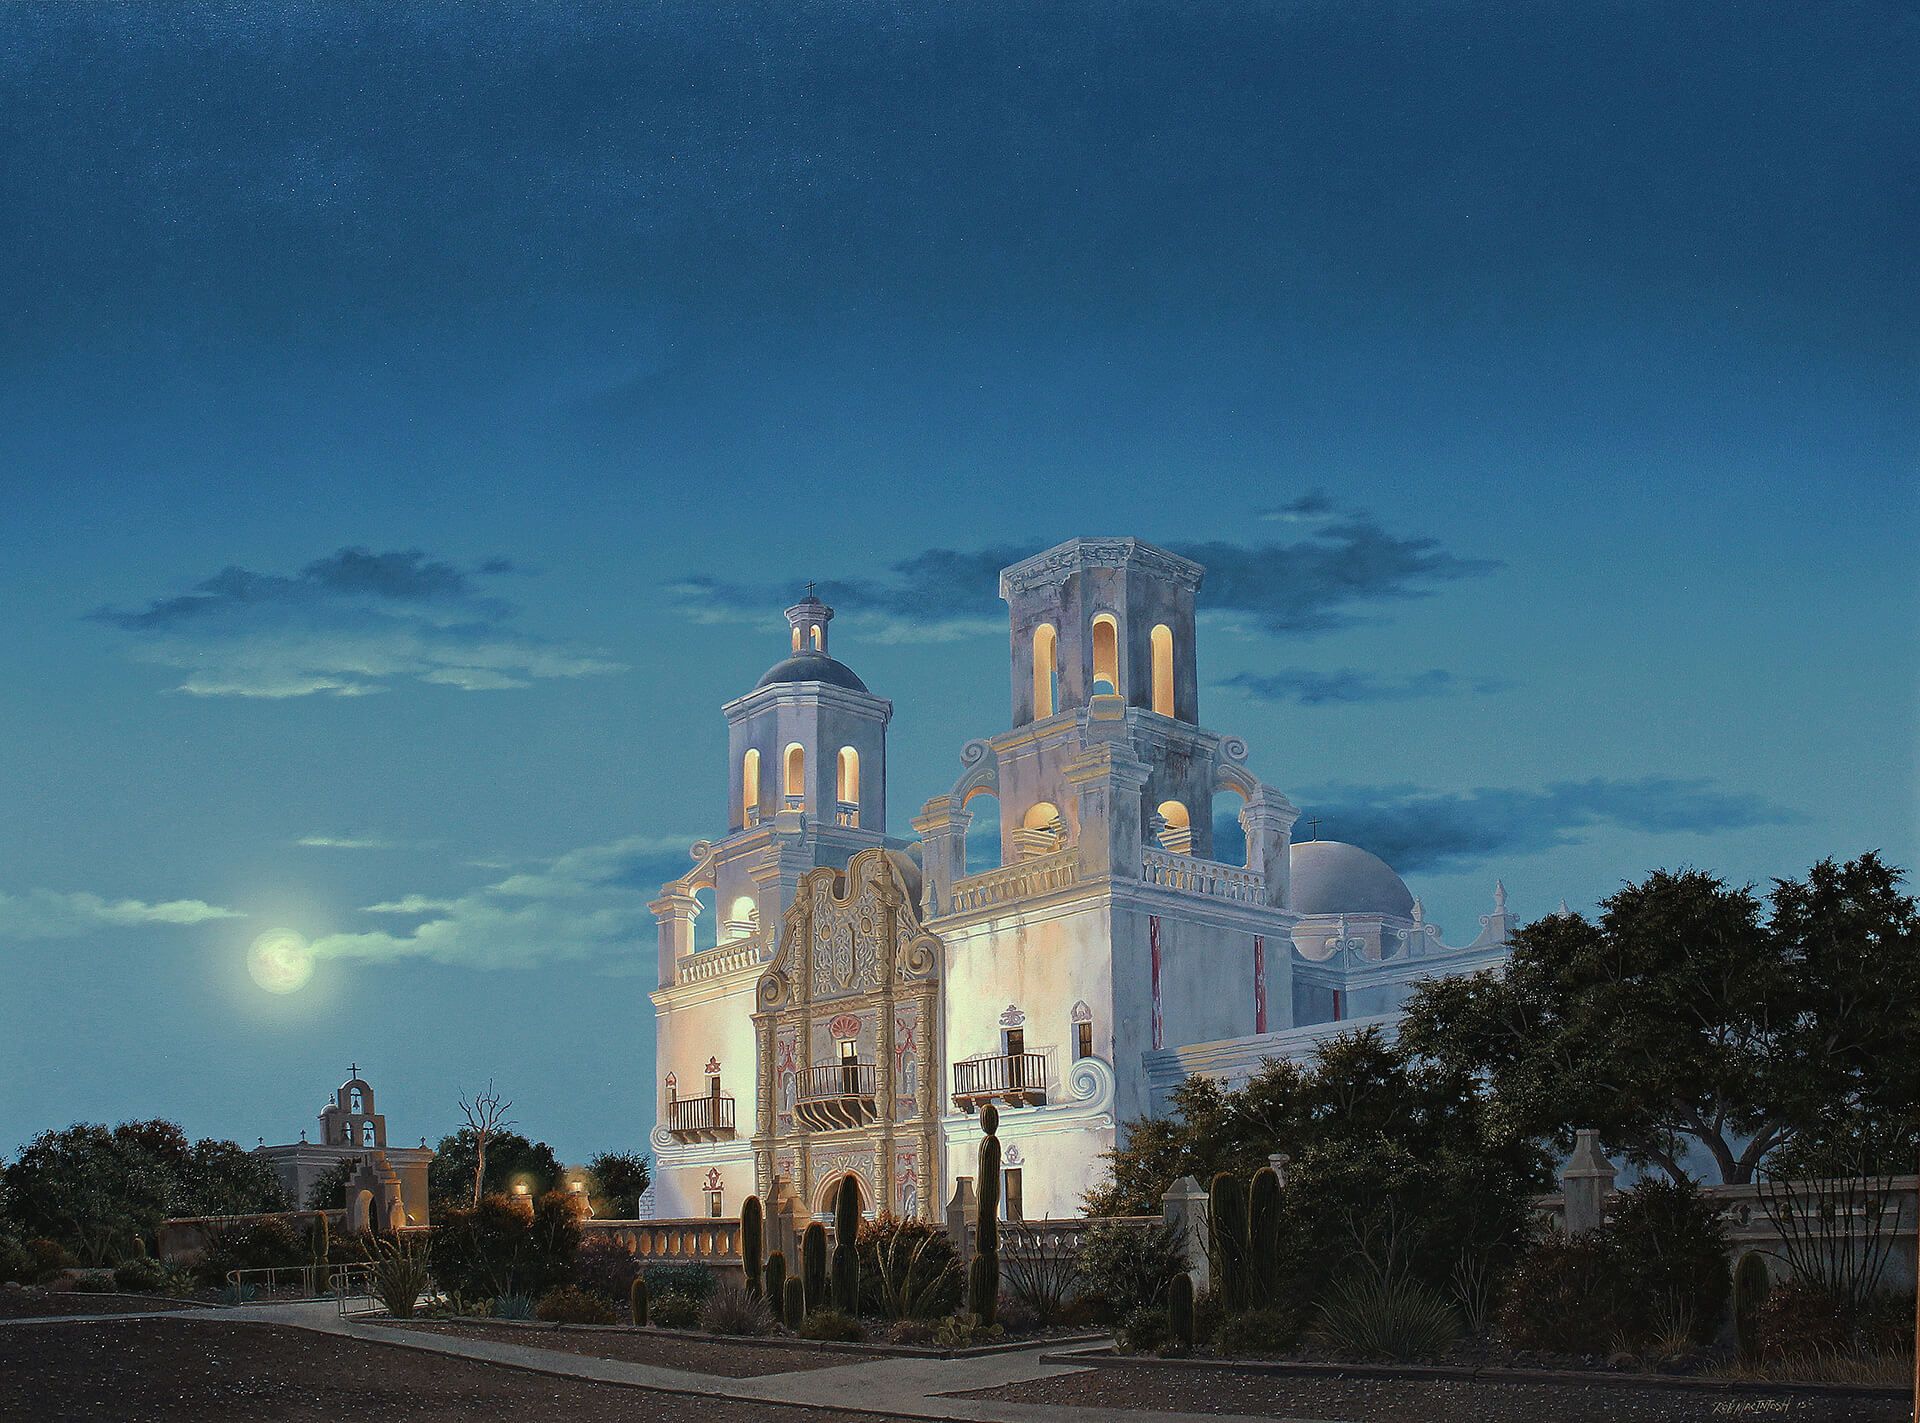 Photorealistic painting of a full moon over San Xavier